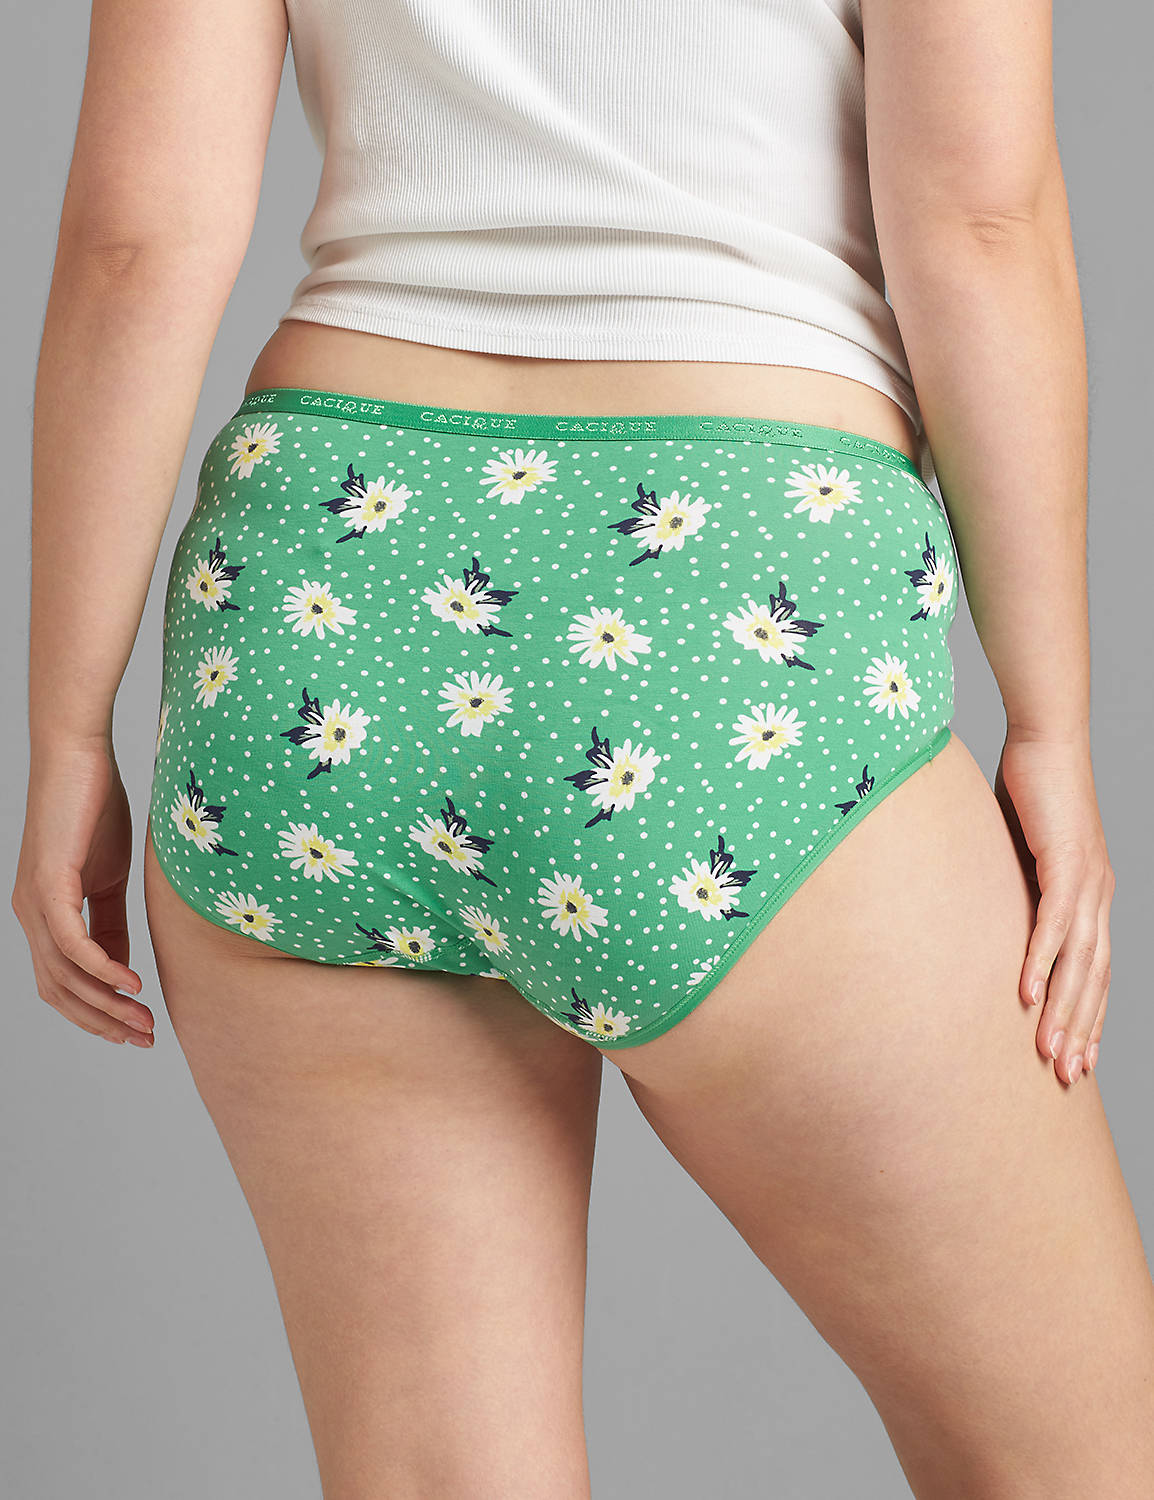 Cotton High-Leg Brief Panty:Daisy_Greenbriar_CSP20207:12 Product Image 2